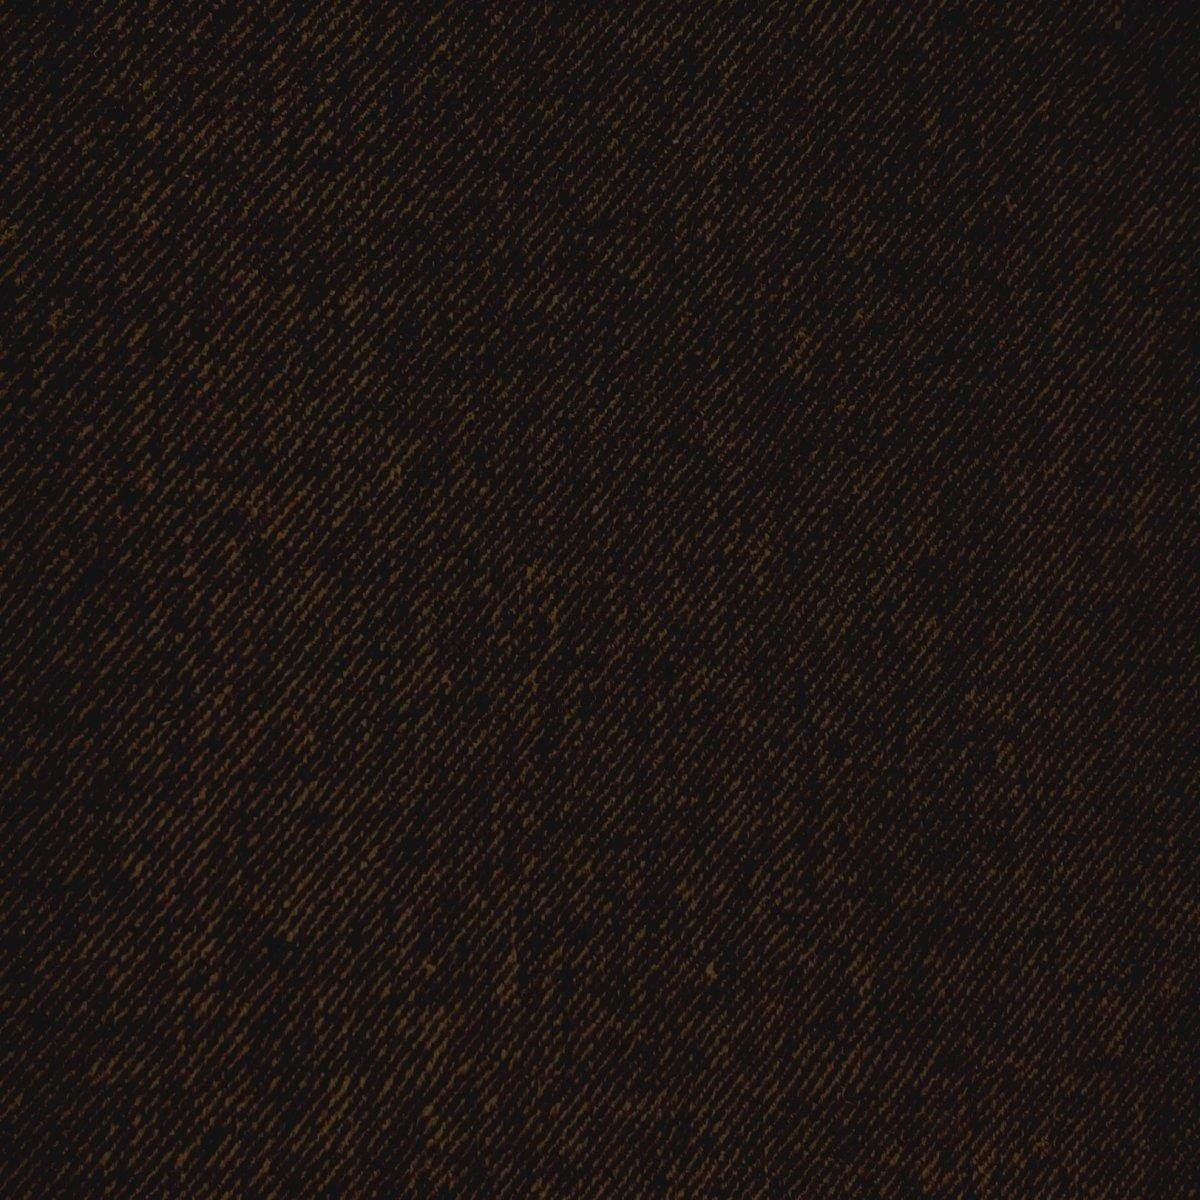 contract grade upholstery fabric